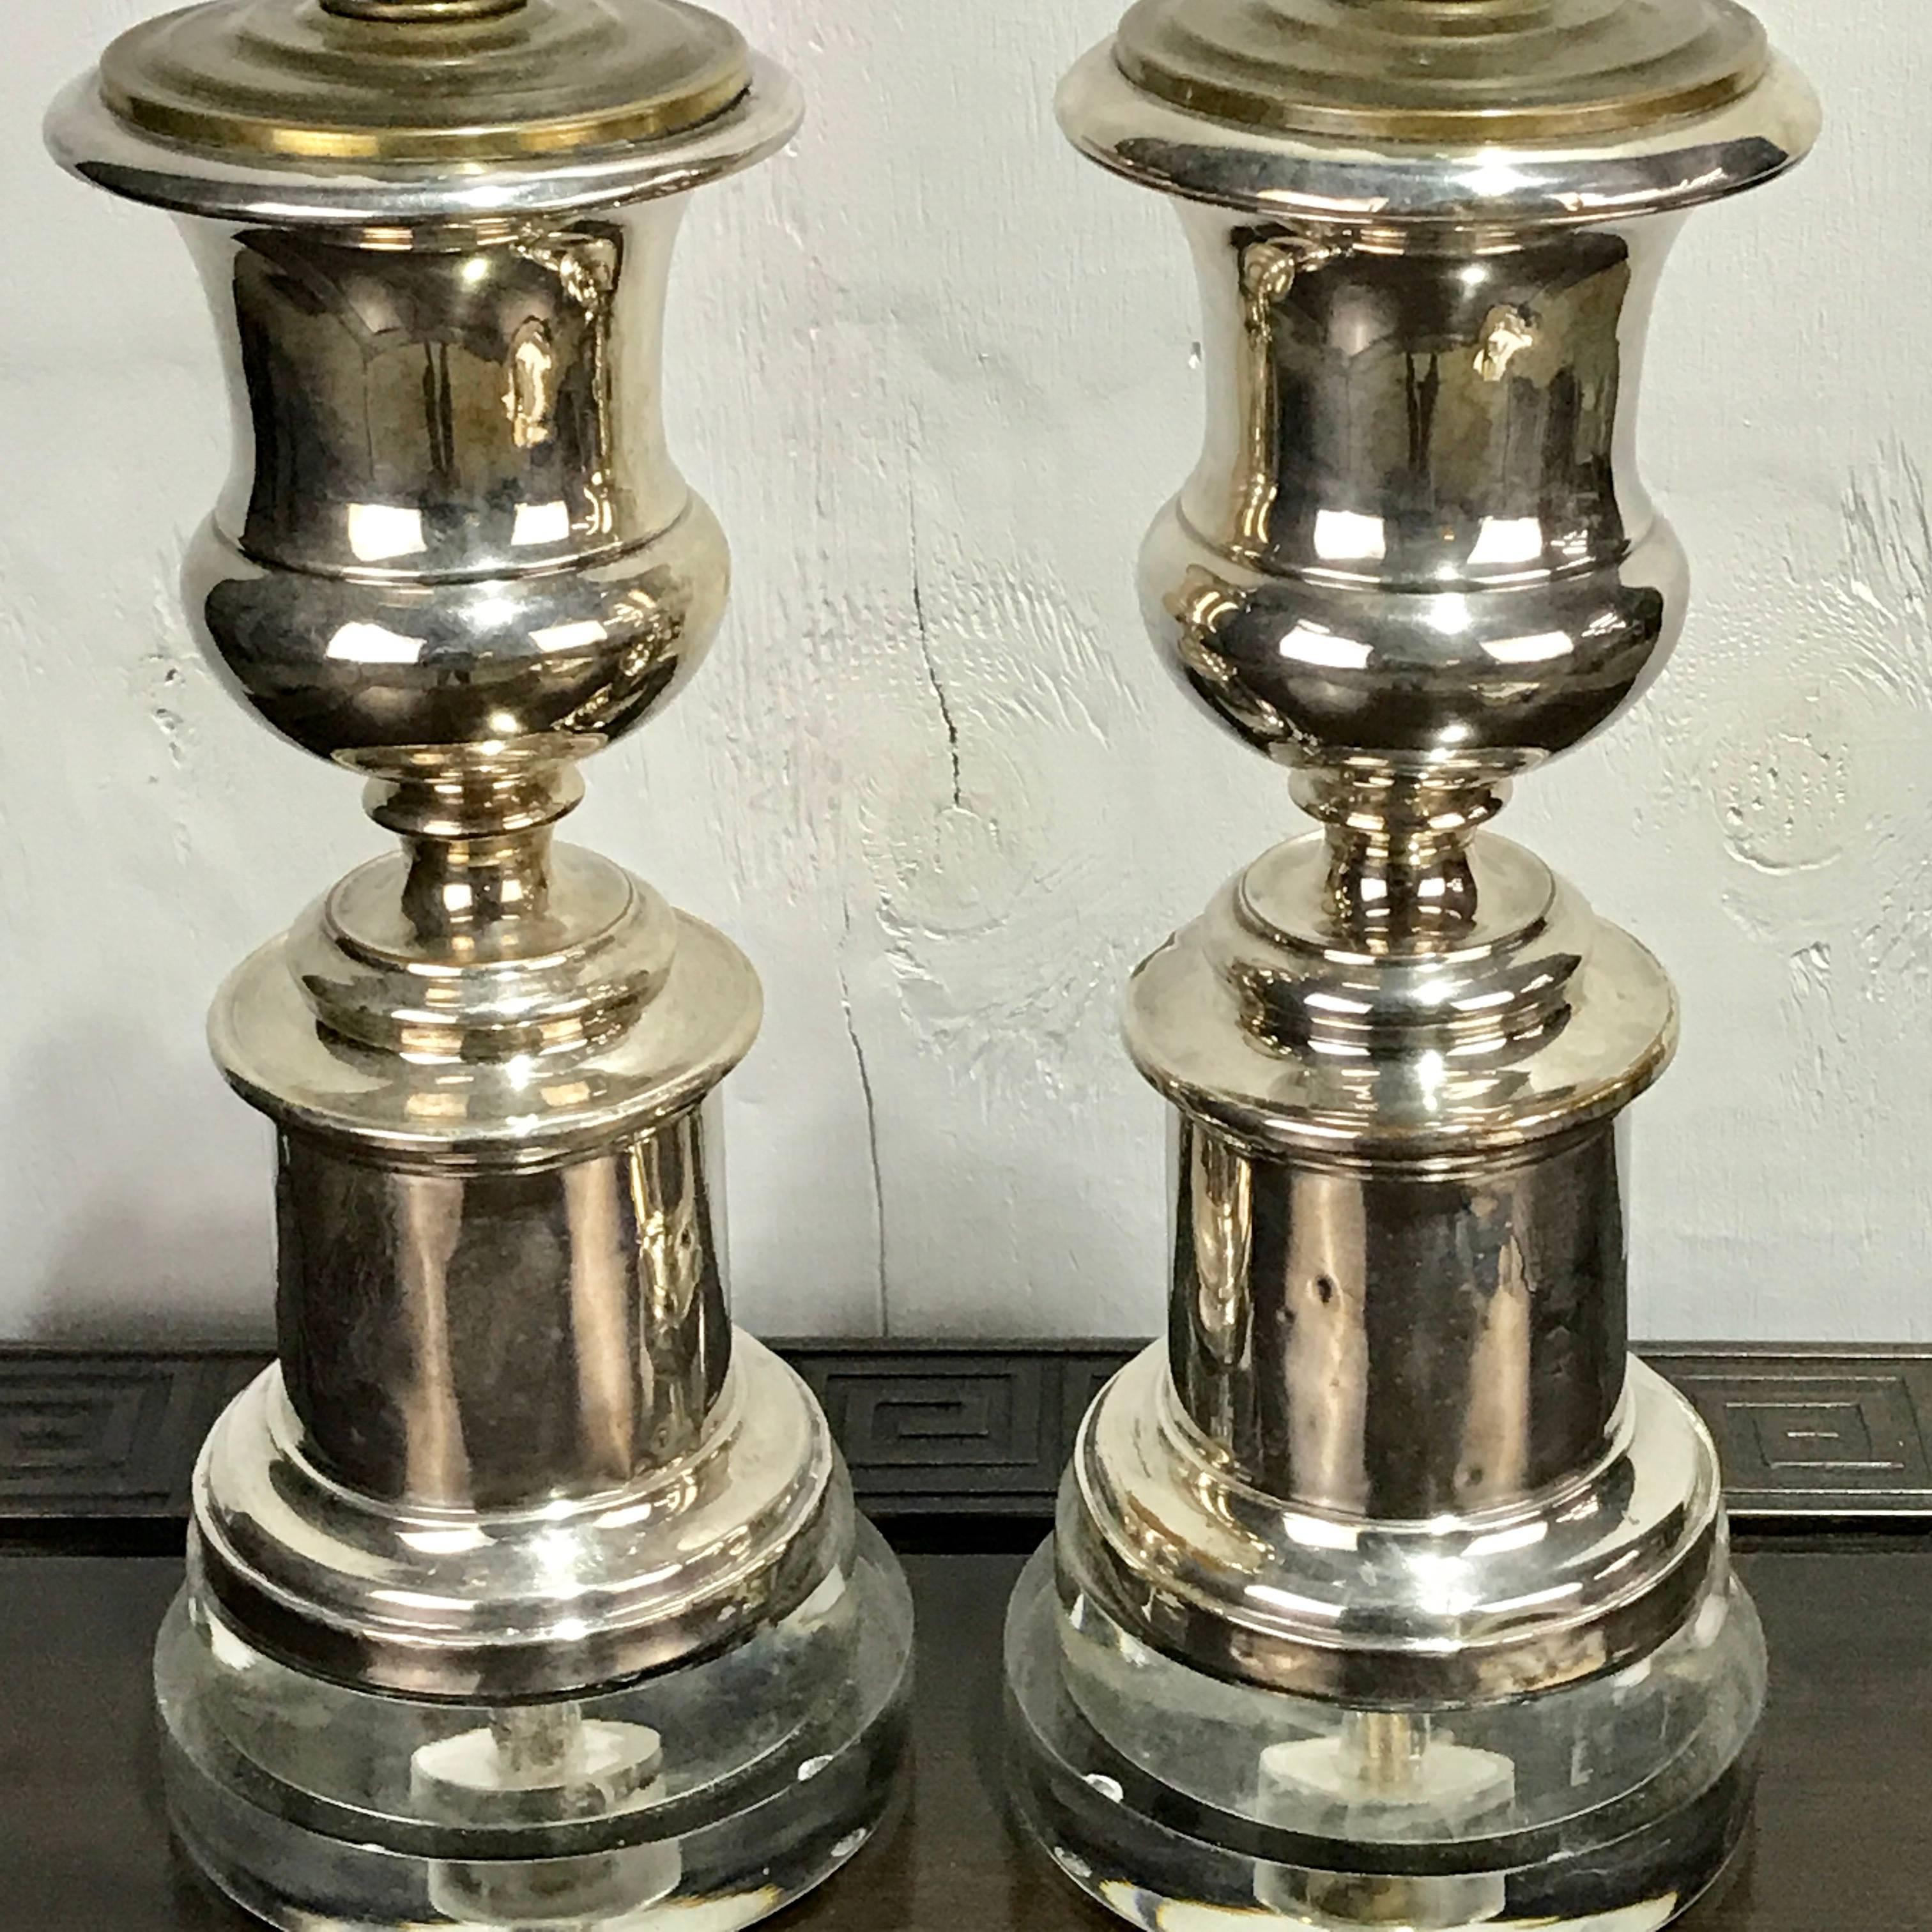 Pair of English Regency silver plated urns now as lamps, each one custom mounted on Lucite pedestal bases. The lamps stand in total height to the socket is 19.5